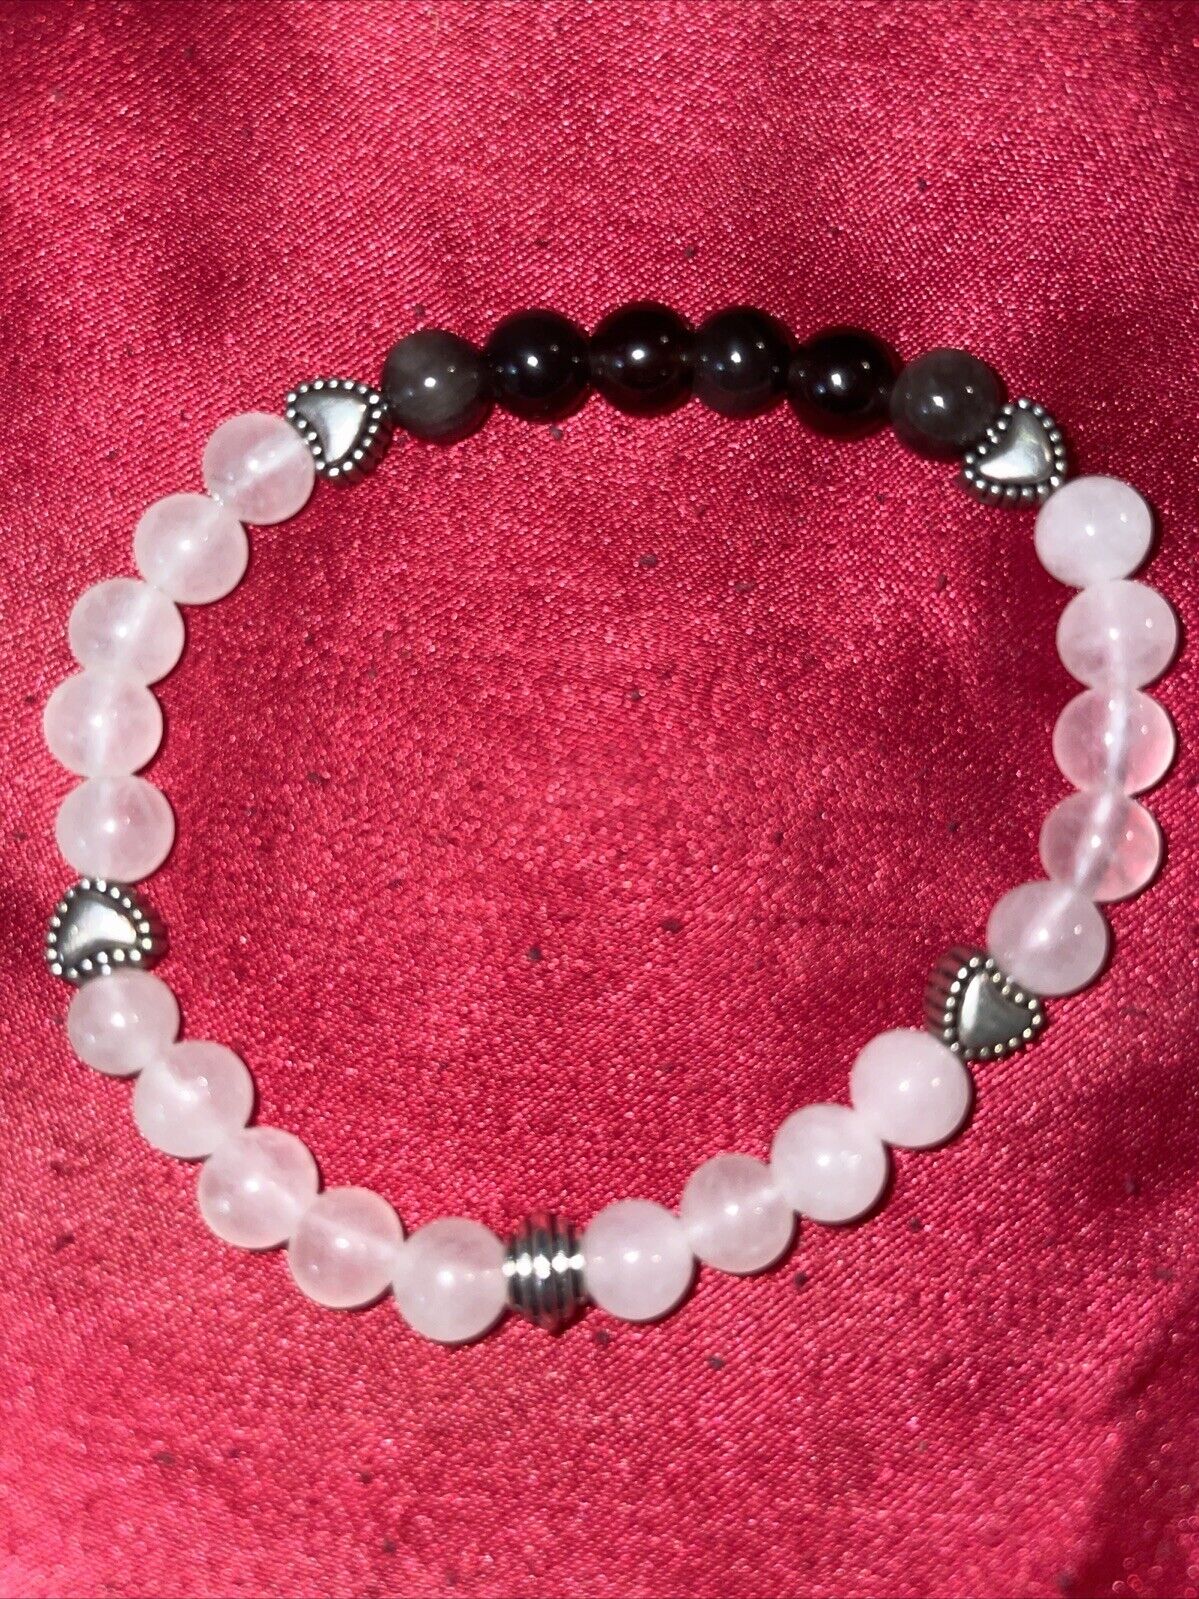 6 Mm Natural Gemstone Clear Quartz And Gray Obsidian